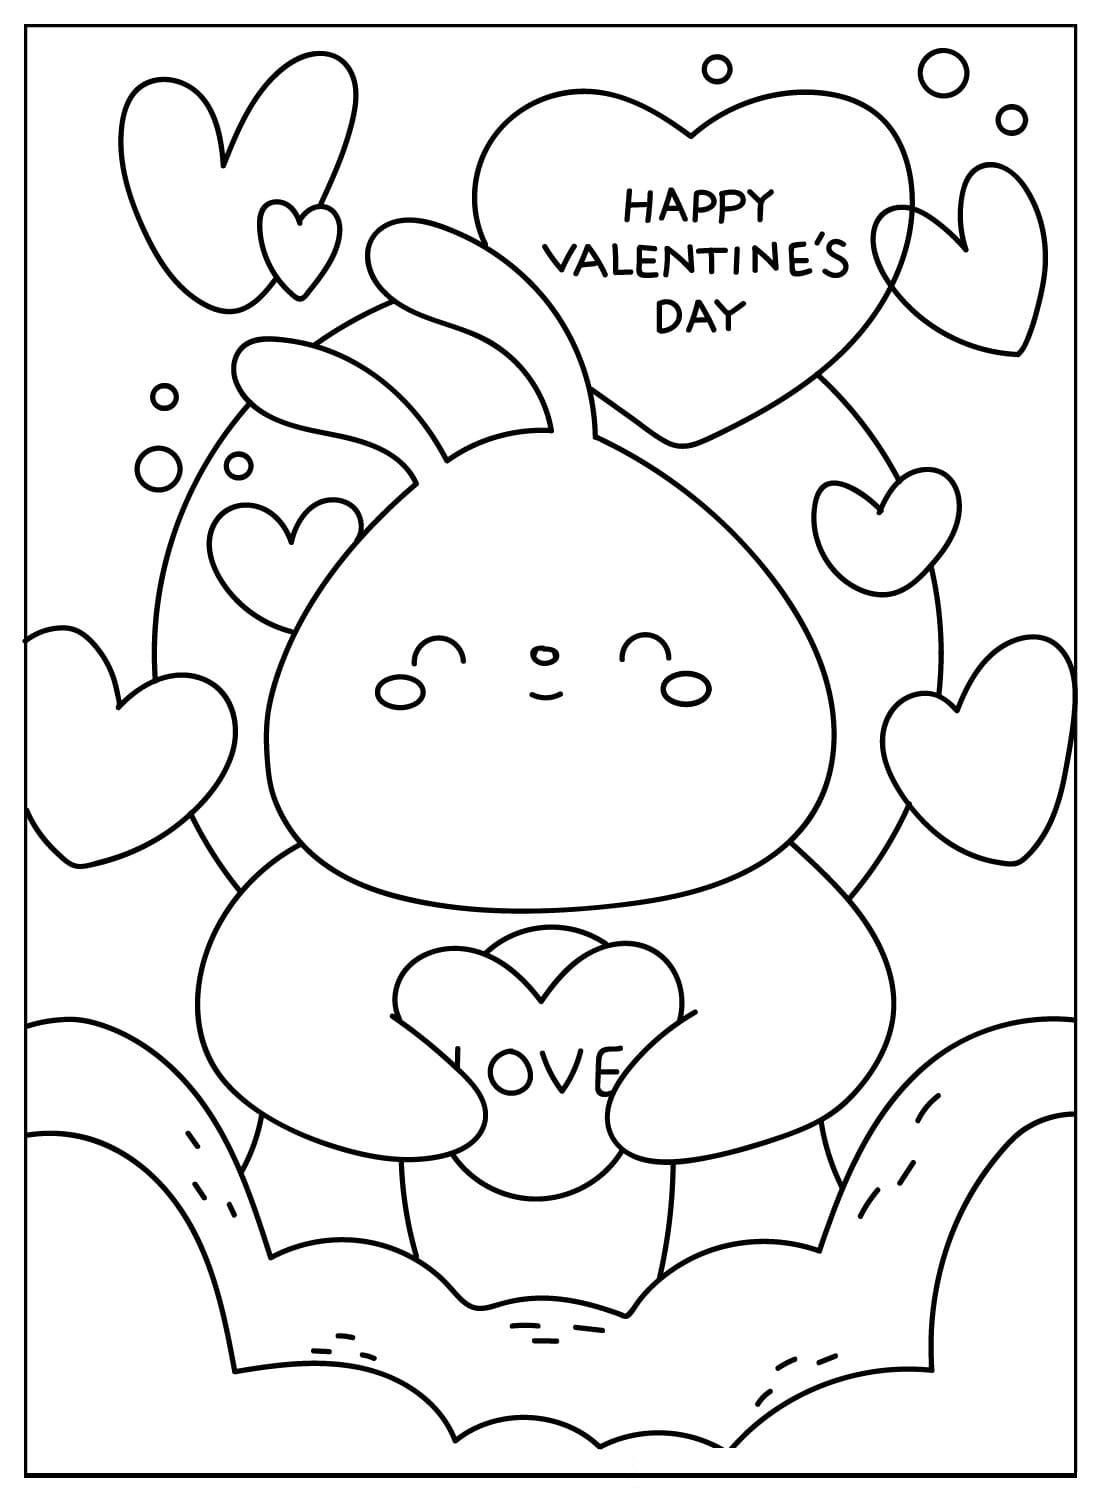 Cute Valentines Day Cards Coloring Page